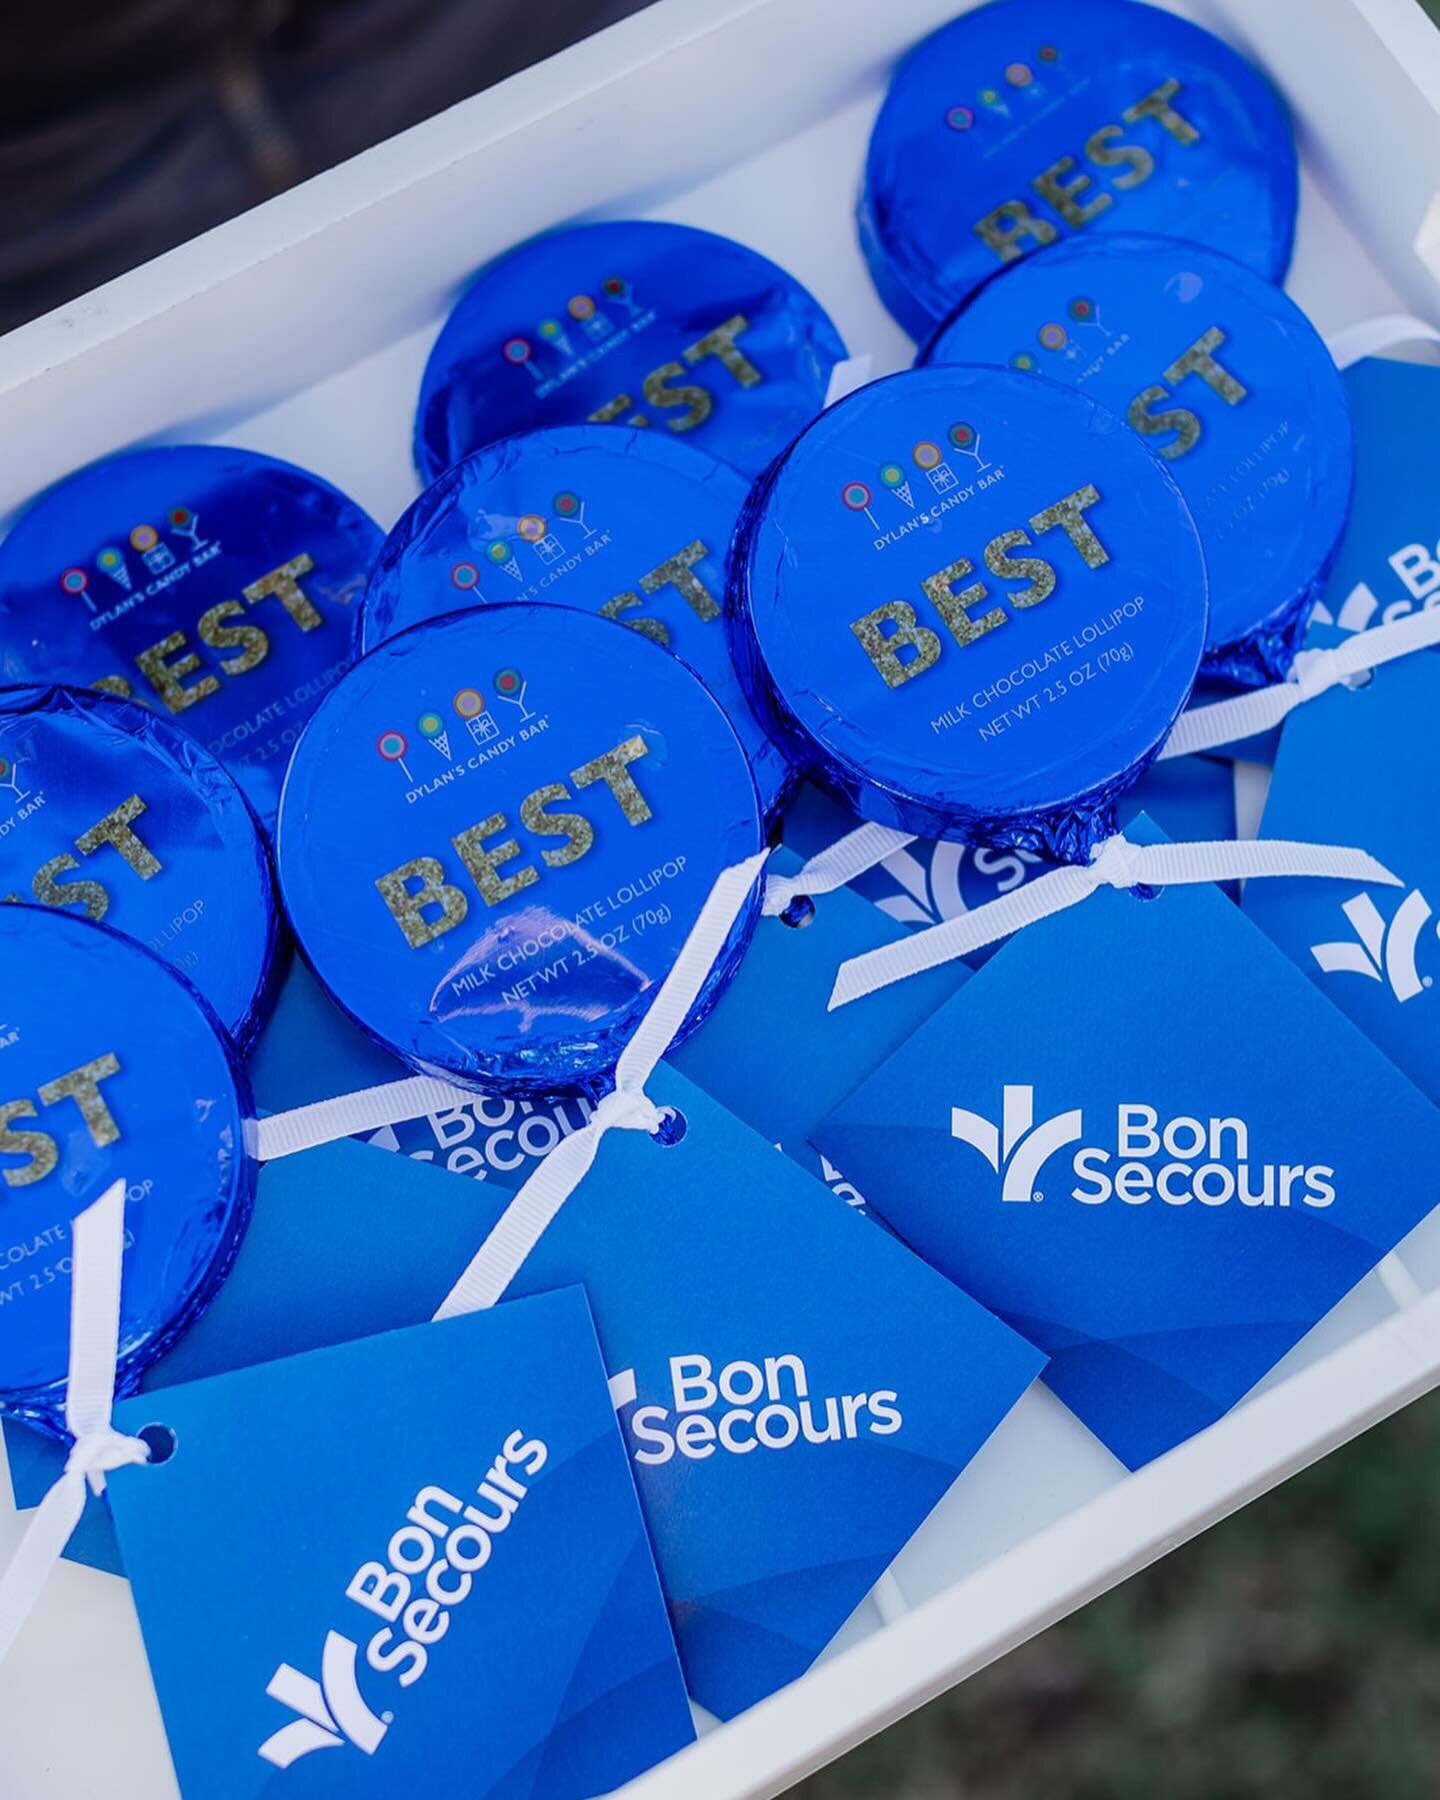 Highlighting the BEST in healthcare with @dylanscandybar chocolate lollipops wrapped in Bon Secours blue while mobile baristas kept guests toasty making hot drinks on demand in branded @yeti mugs.